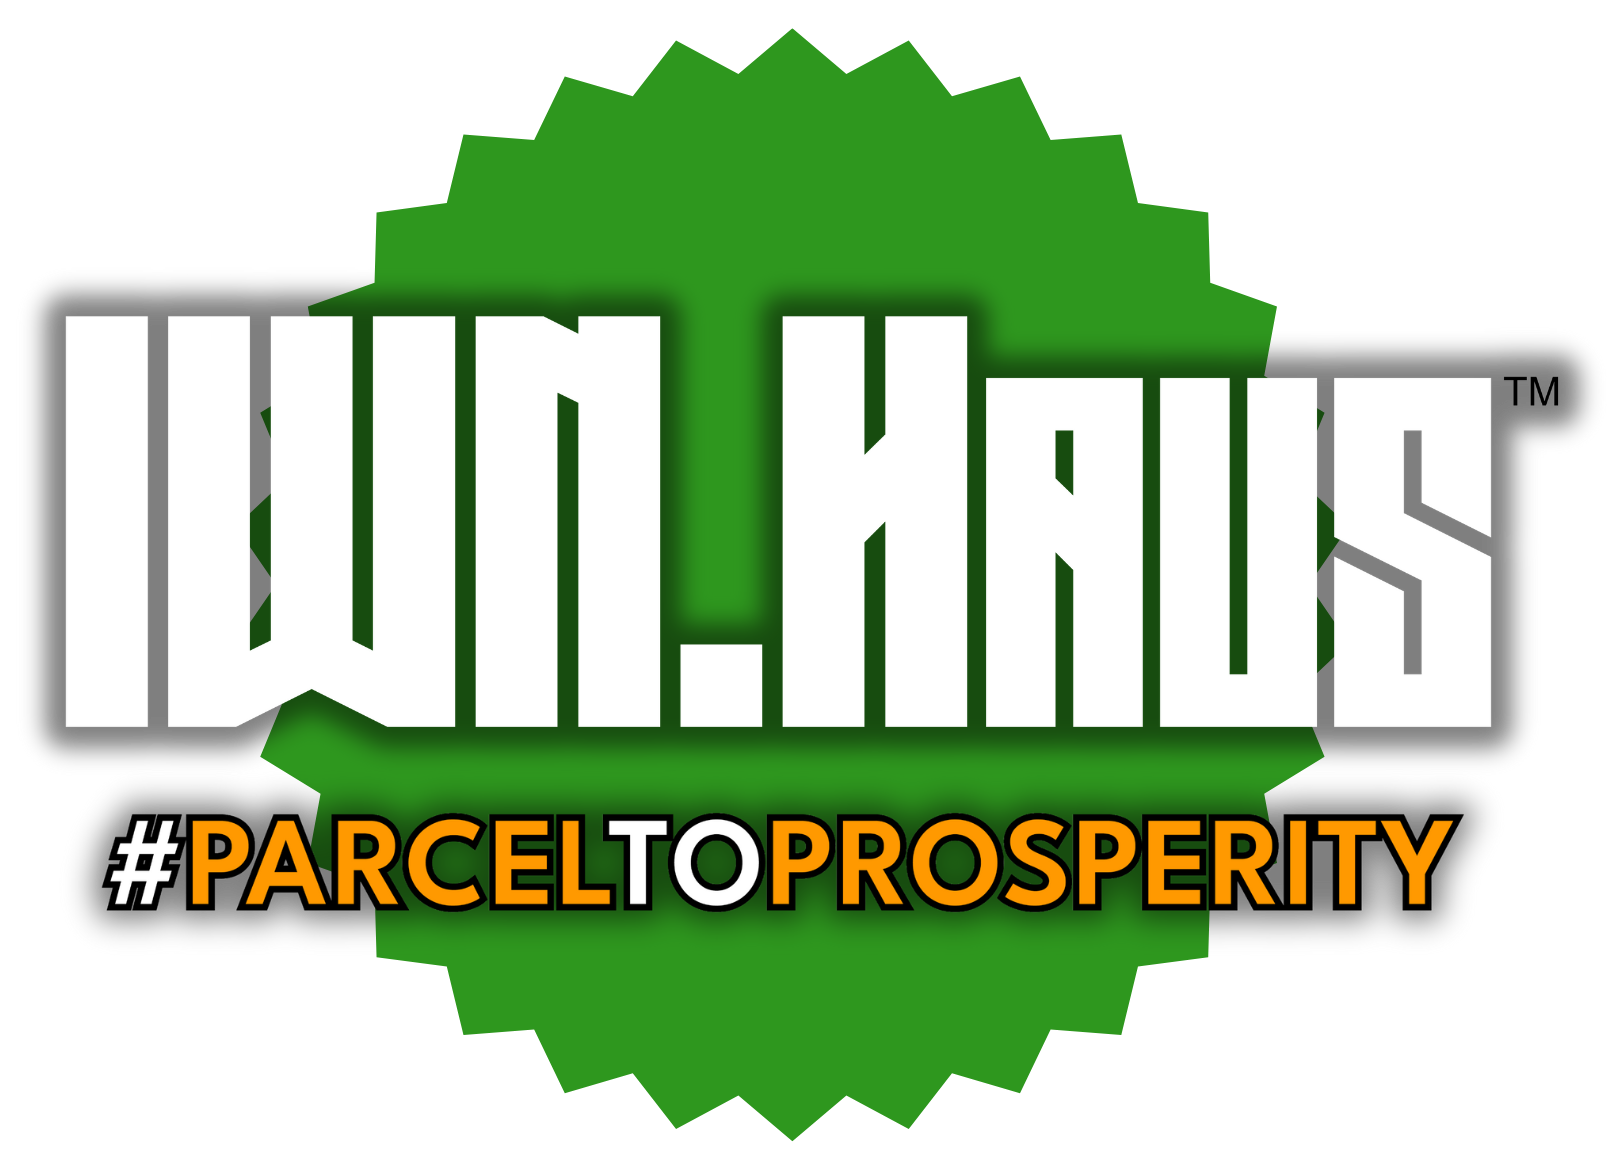 IWN.Haus #ParcelToProsperity Crowdfund to Transform South Side Lot into Thriving Community Hub in a Chicago Opportunity Zone. Help make it happen!